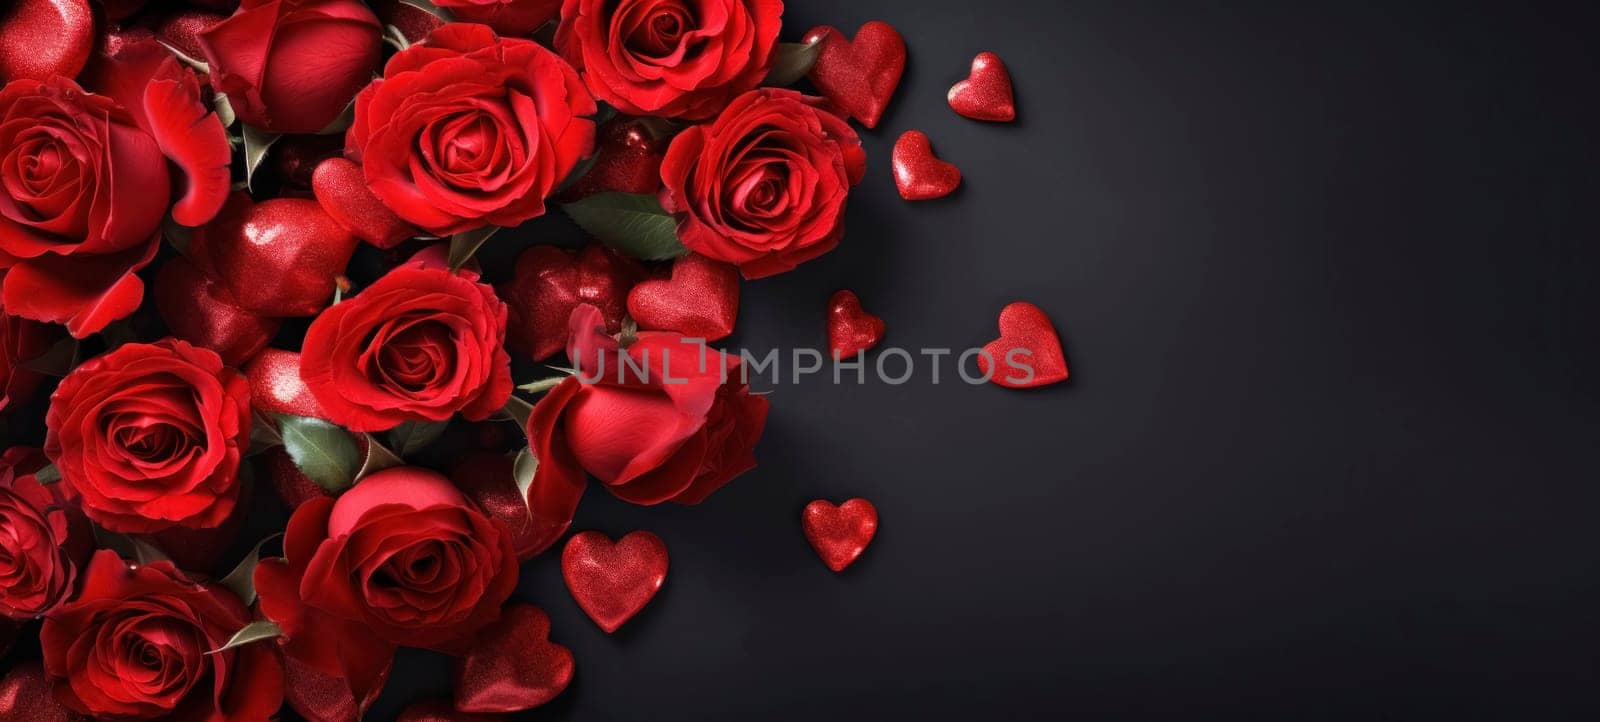 Roses, petals and hearts on a dark background with copy space by andreyz